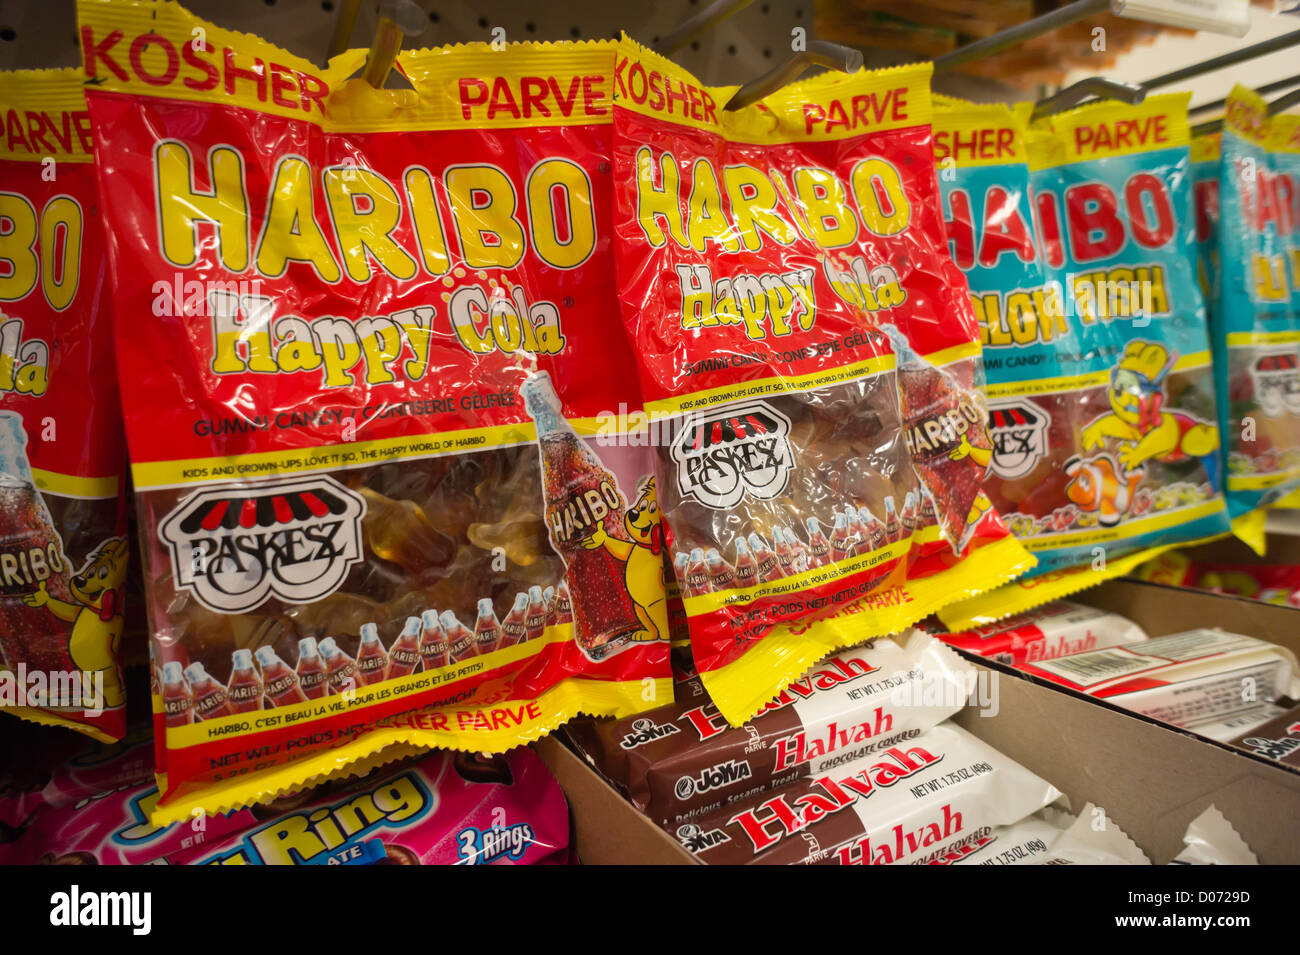 A display of kosher Haribo Gummi Candies is seen in a supermarket in New York Stock Photo